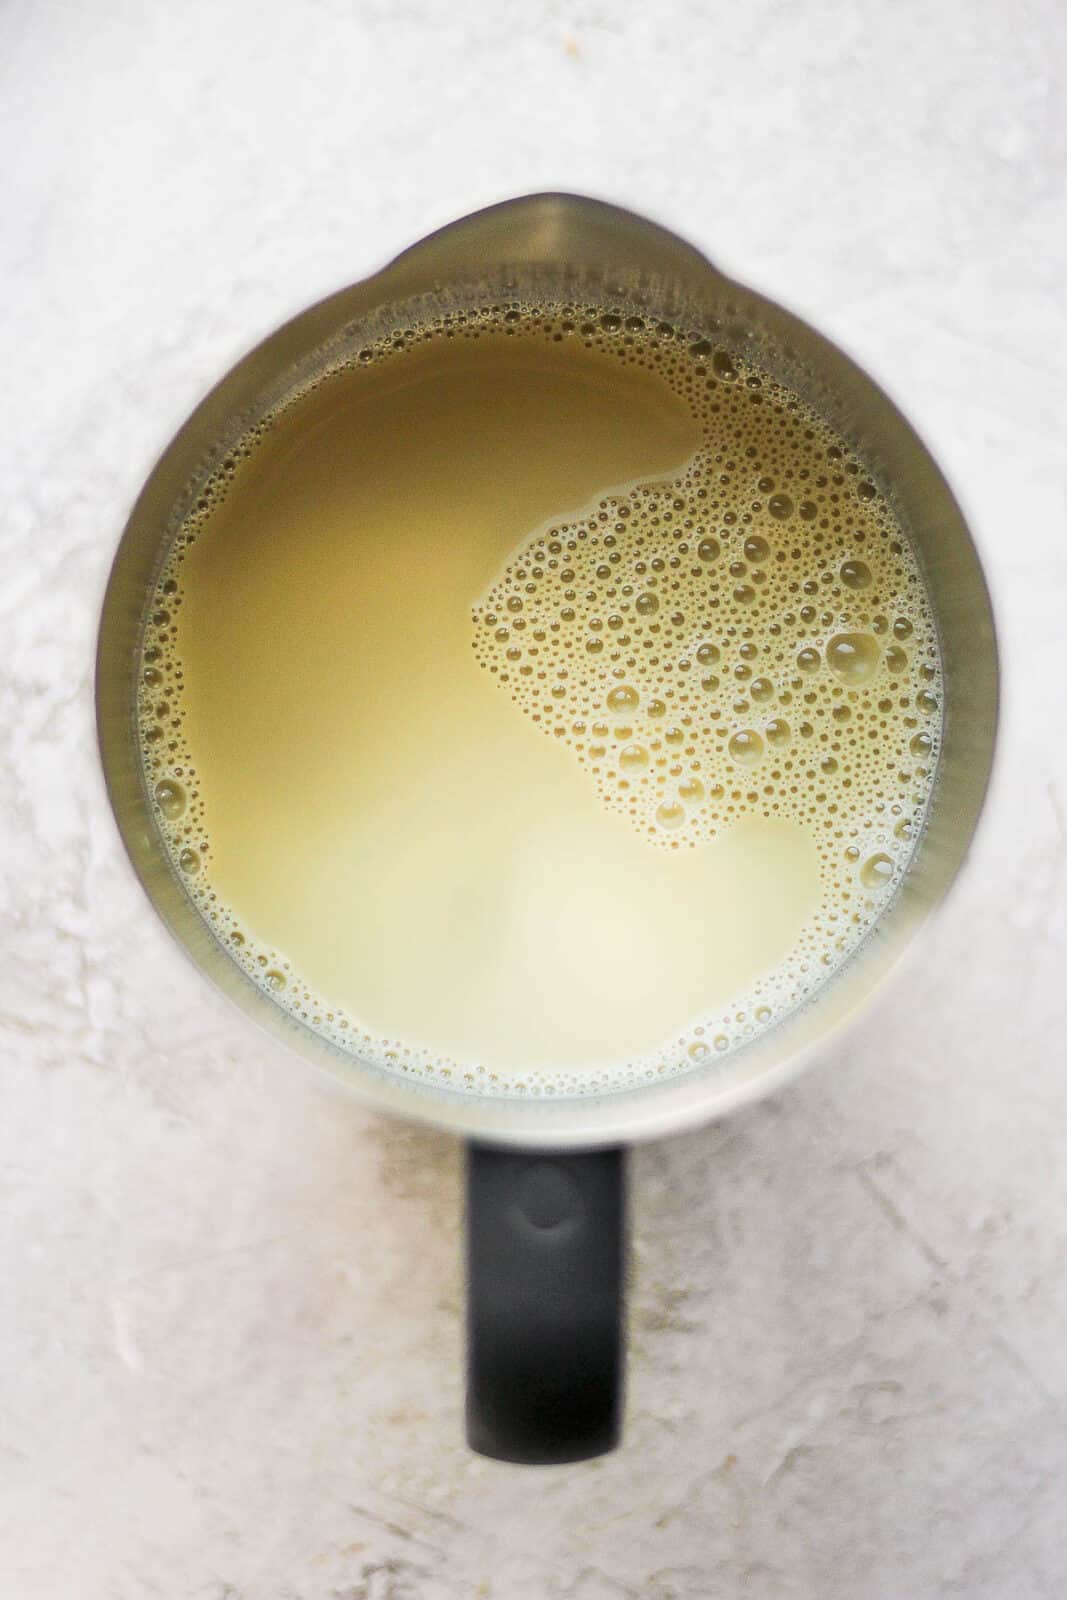 Pistachio milk, vanilla extract, and maple syrup in a frother. 